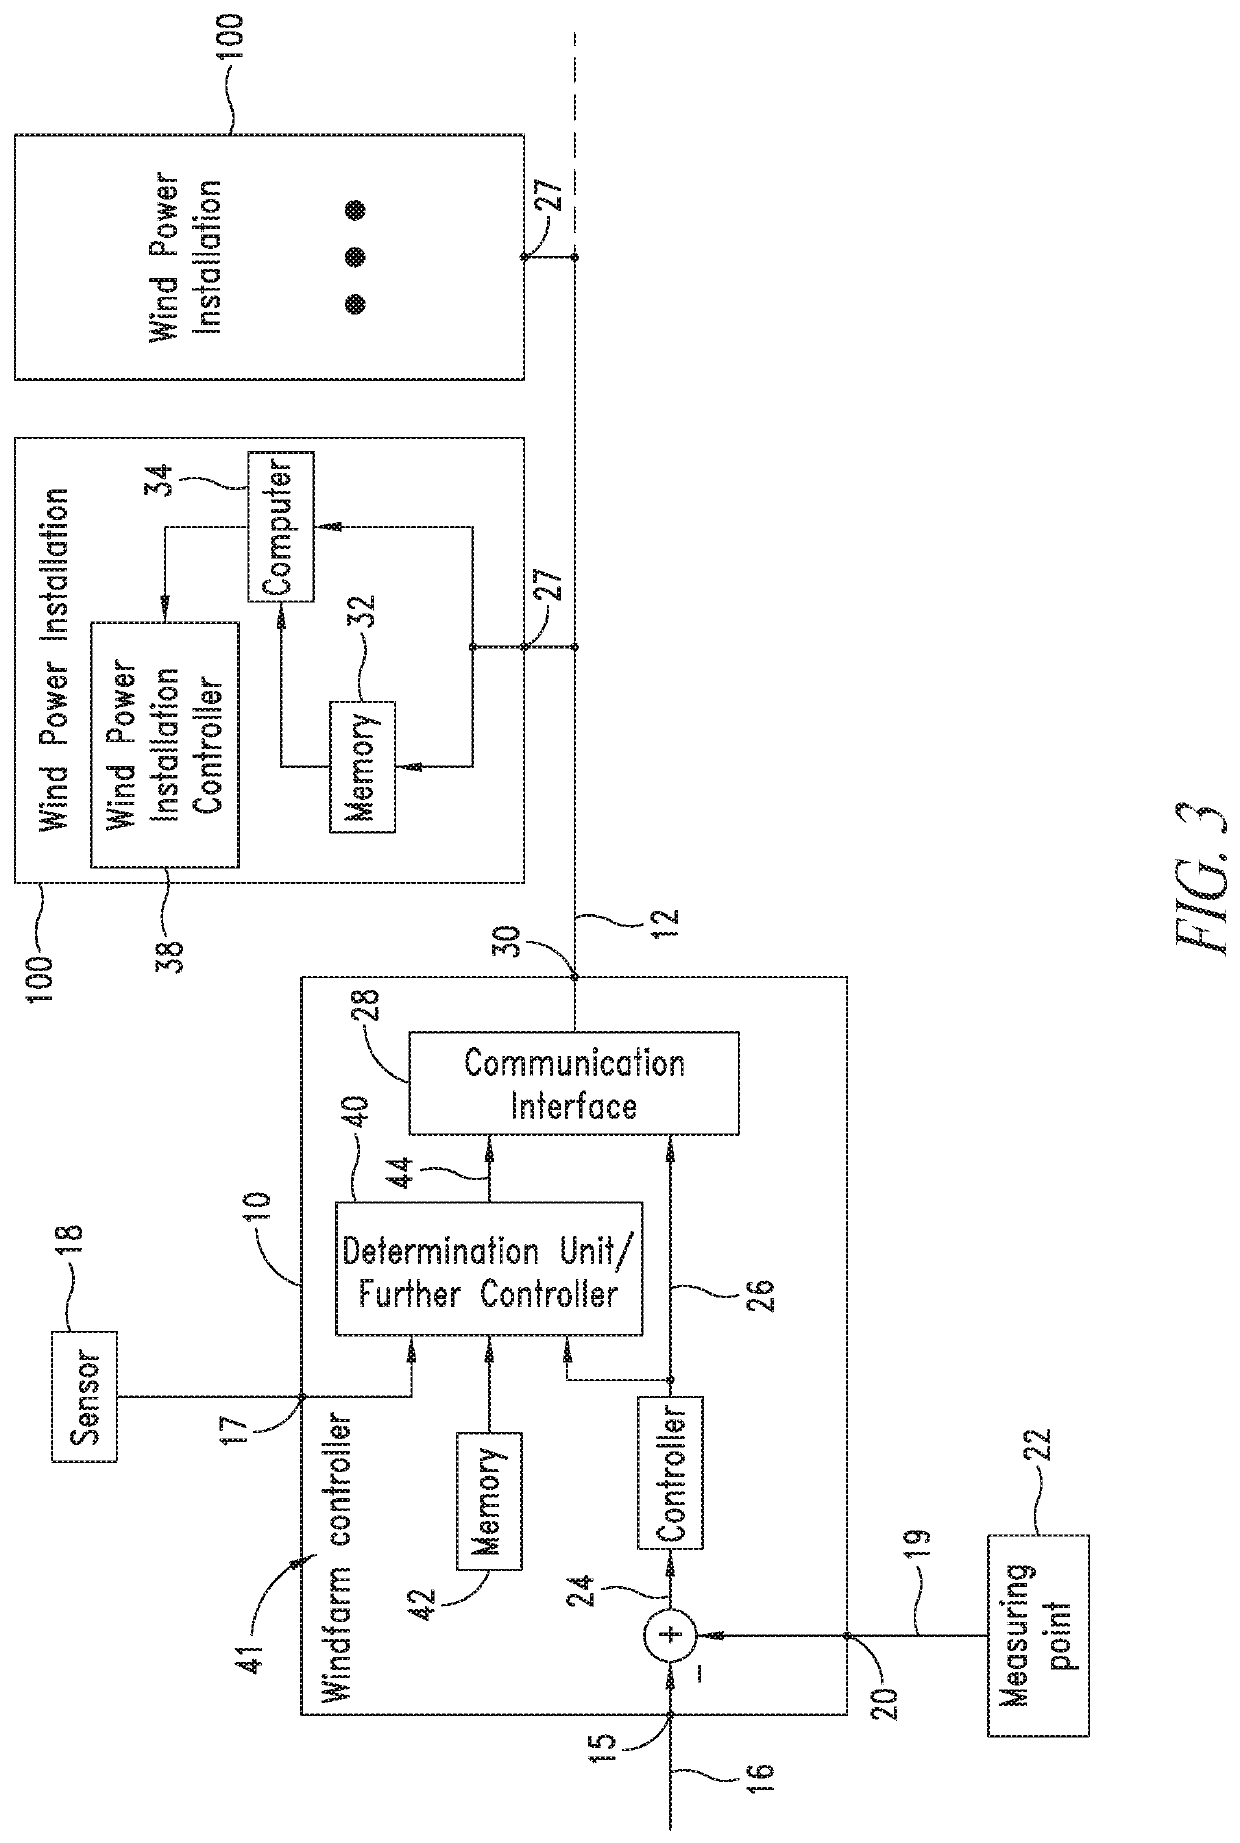 Wind farm controller, controlled units and method for transmitting control variables from the wind farm controller to the controlled units